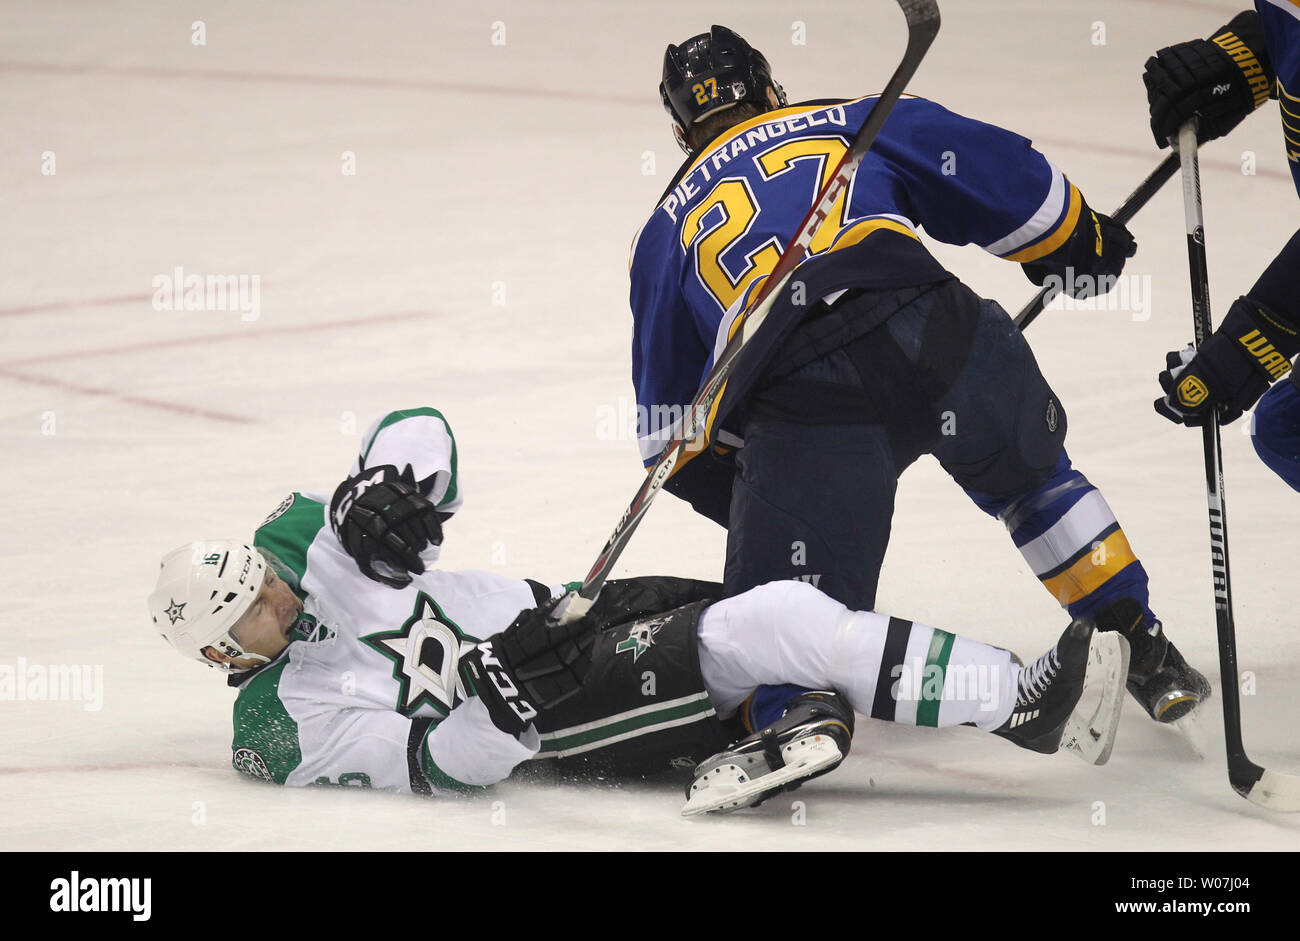 St. Louis Blues Alex Pietrangelo takes down Dallas Stars Ryan Garbutt in the first period at the Scottrade Center in St. Louis on February 17, 2015. Photo by BIll Greenblatt/UPI Stock Photo